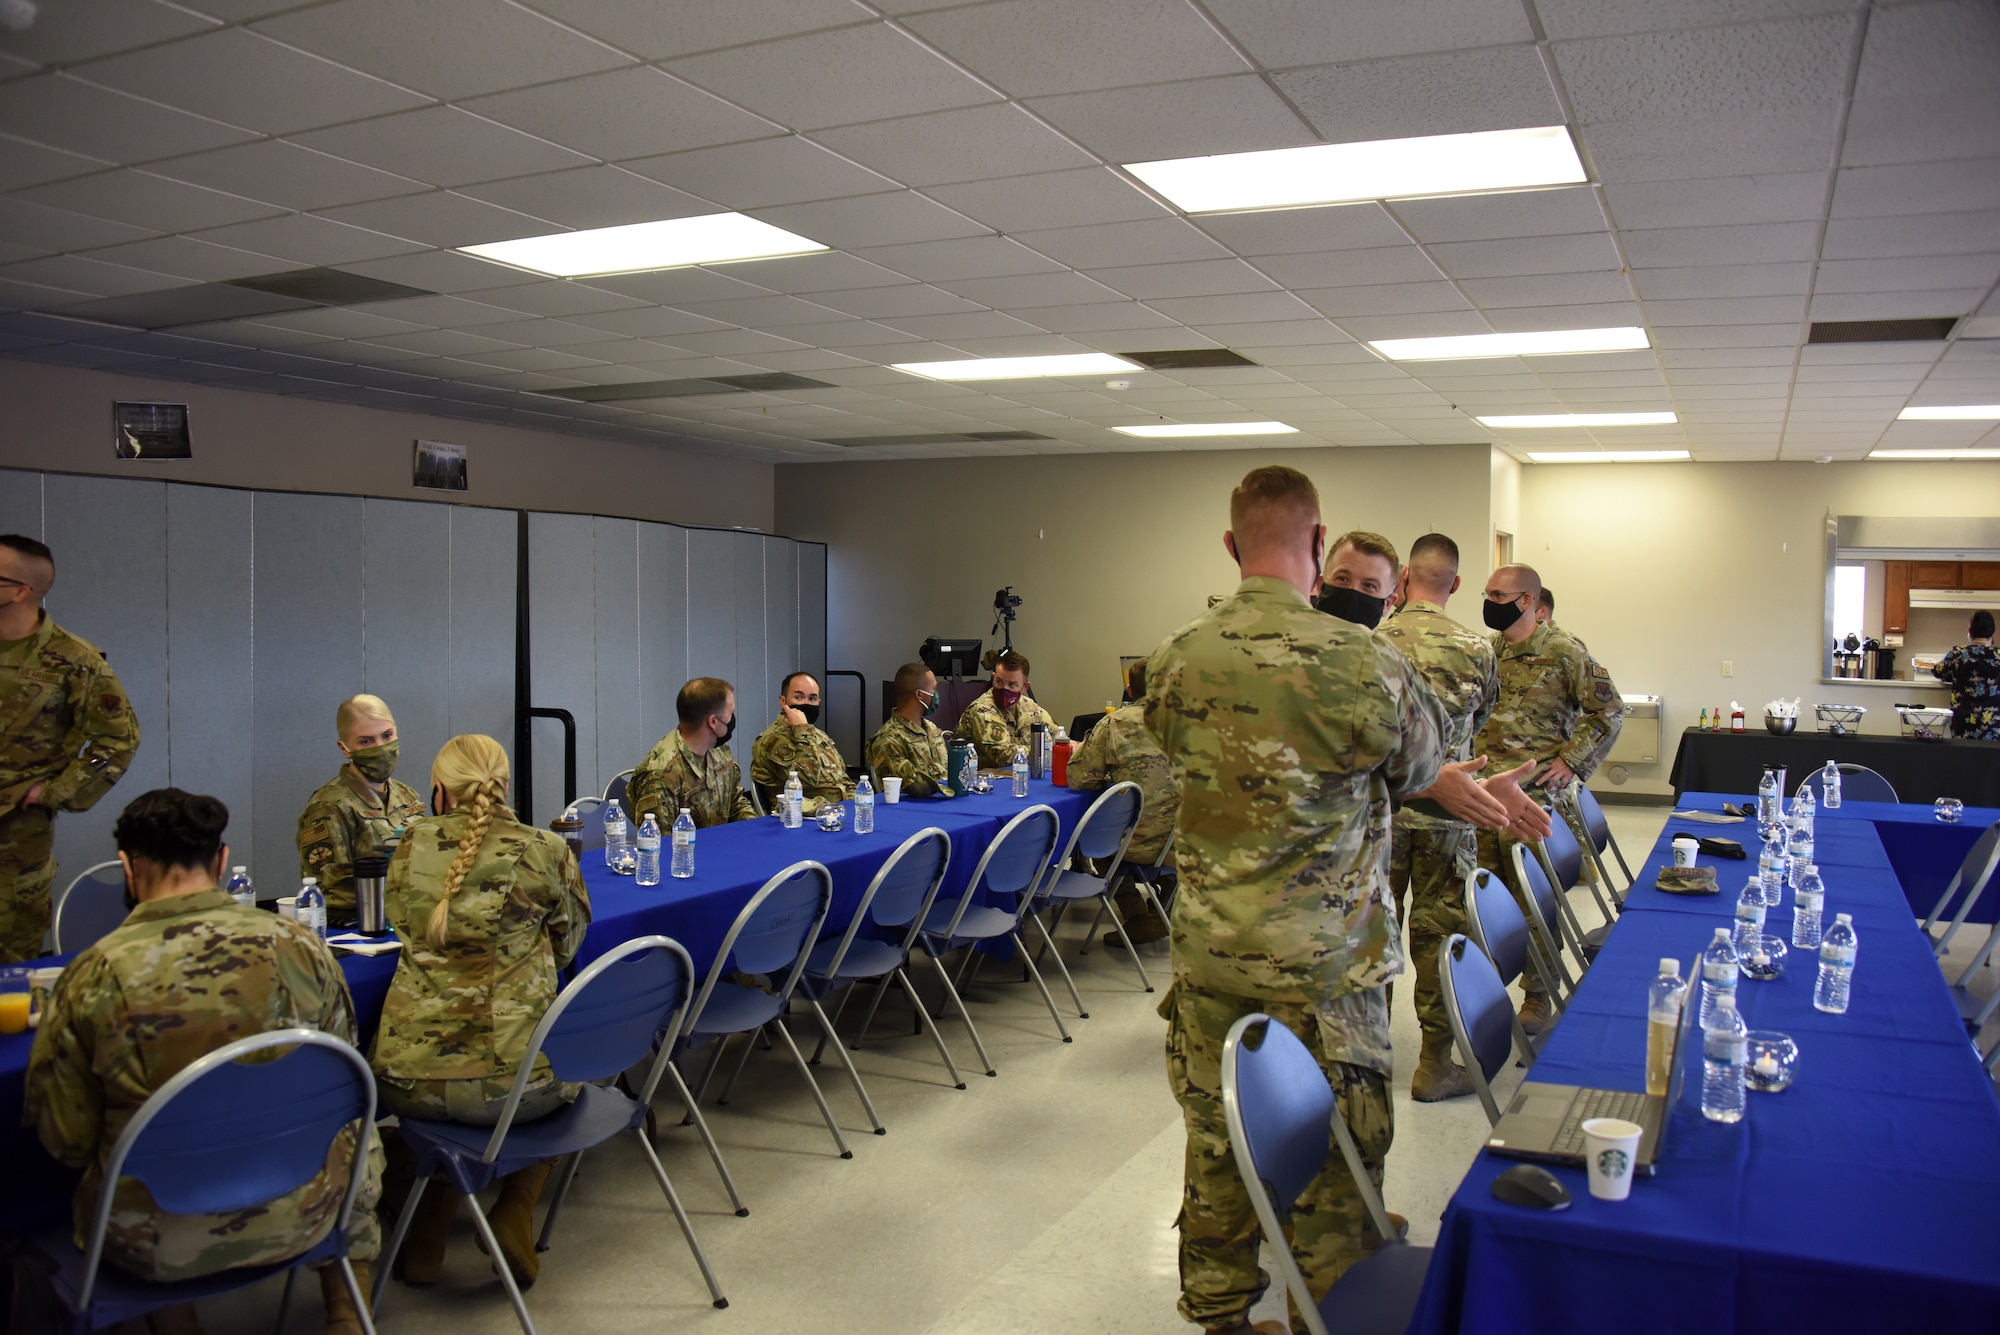 A photo of Airmen standing in a room.